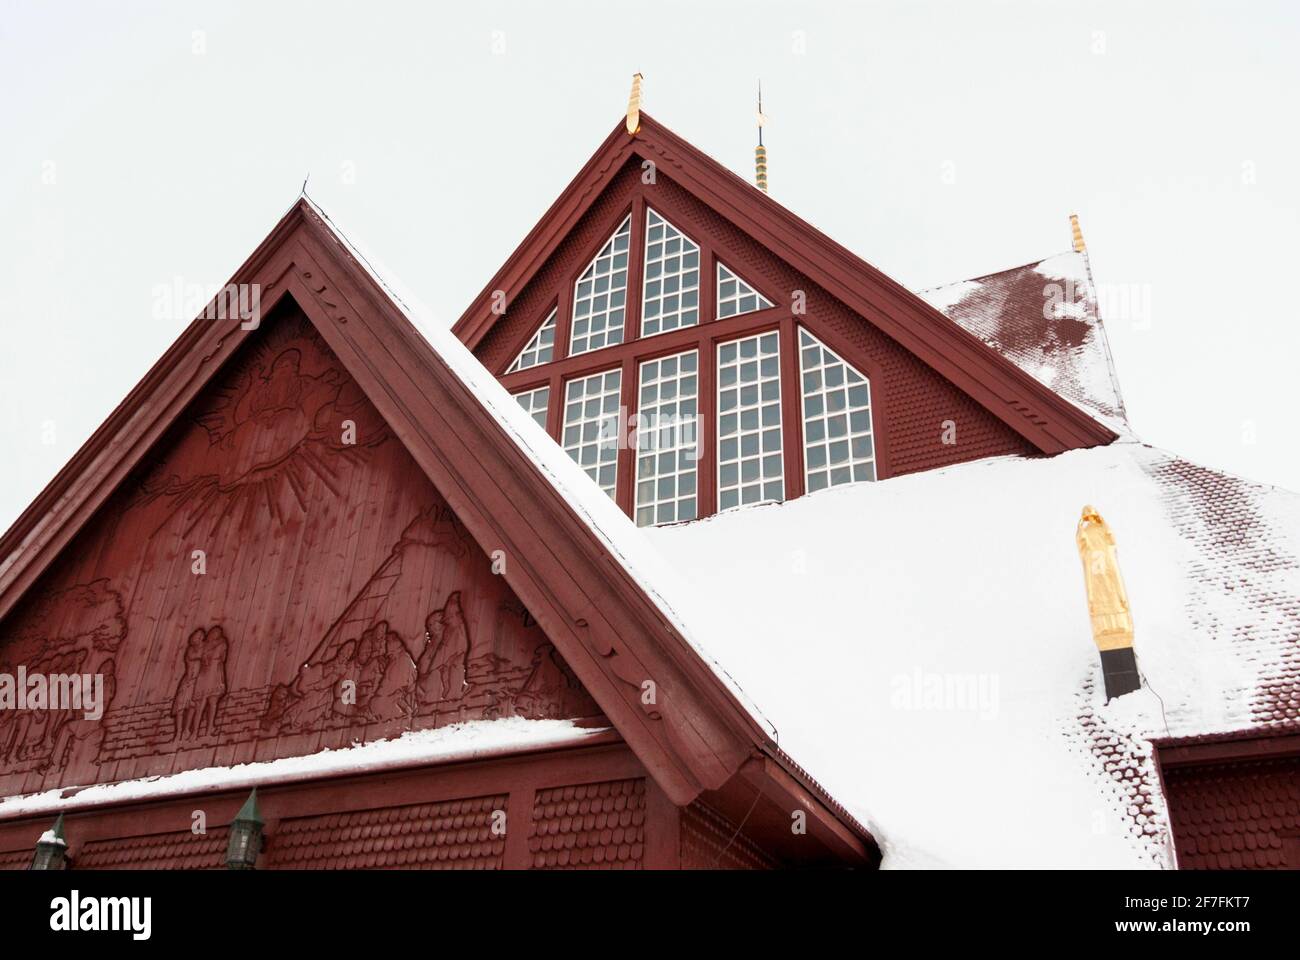 A detail of the red, wooden Kiruna Church, its roof covered in snow (Lapland, Sweden) Stock Photo